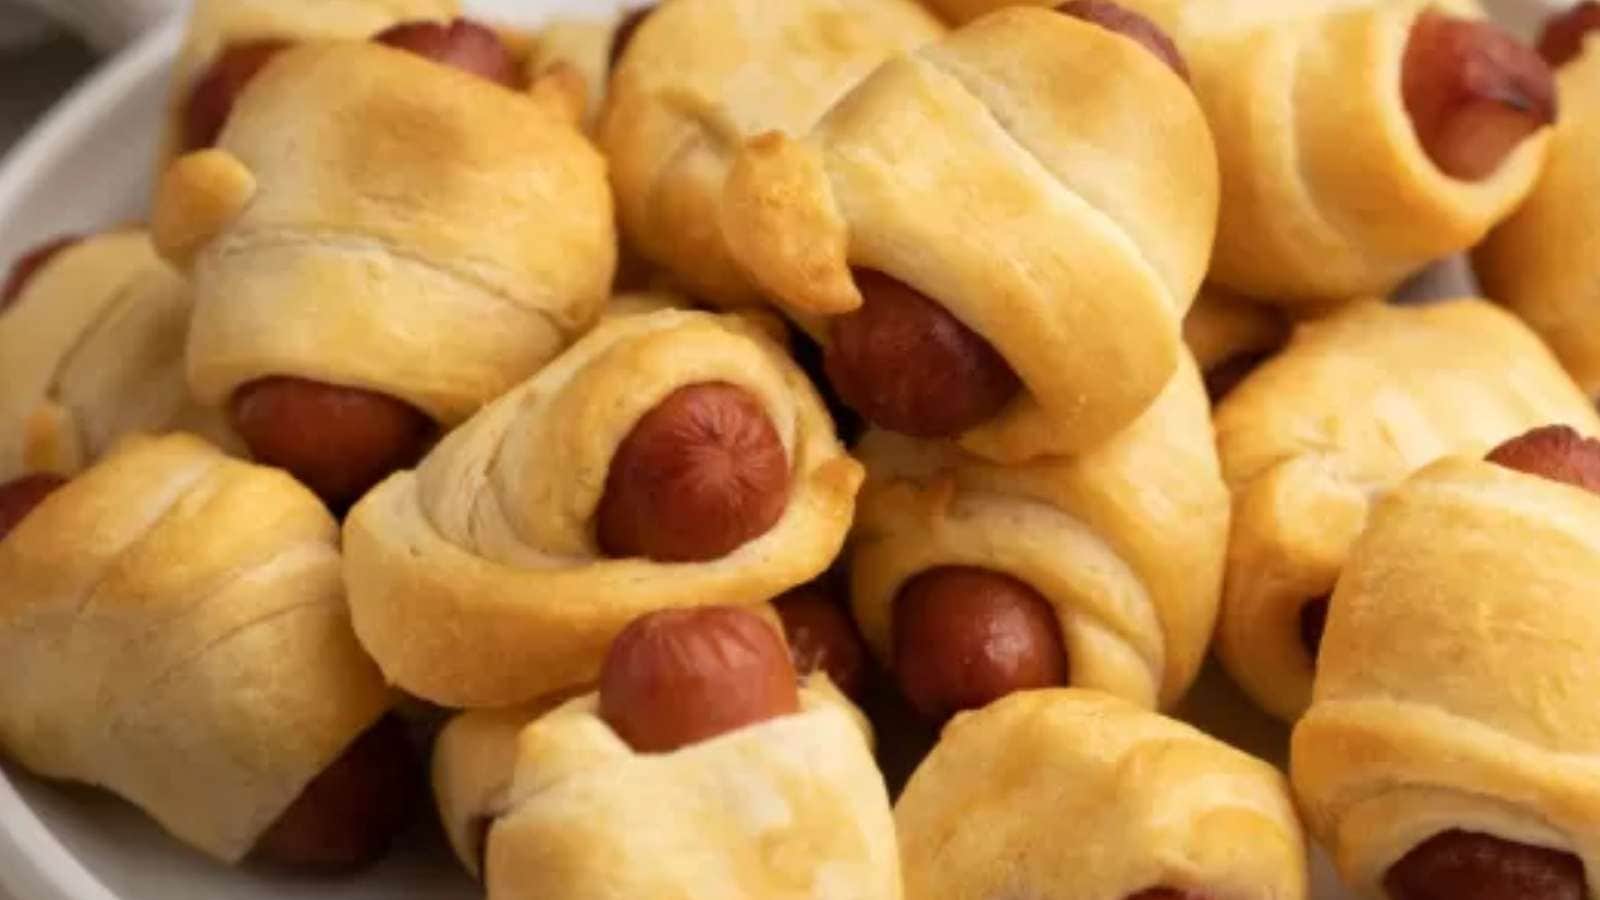 A plate full of hot dogs wrapped in pastry.